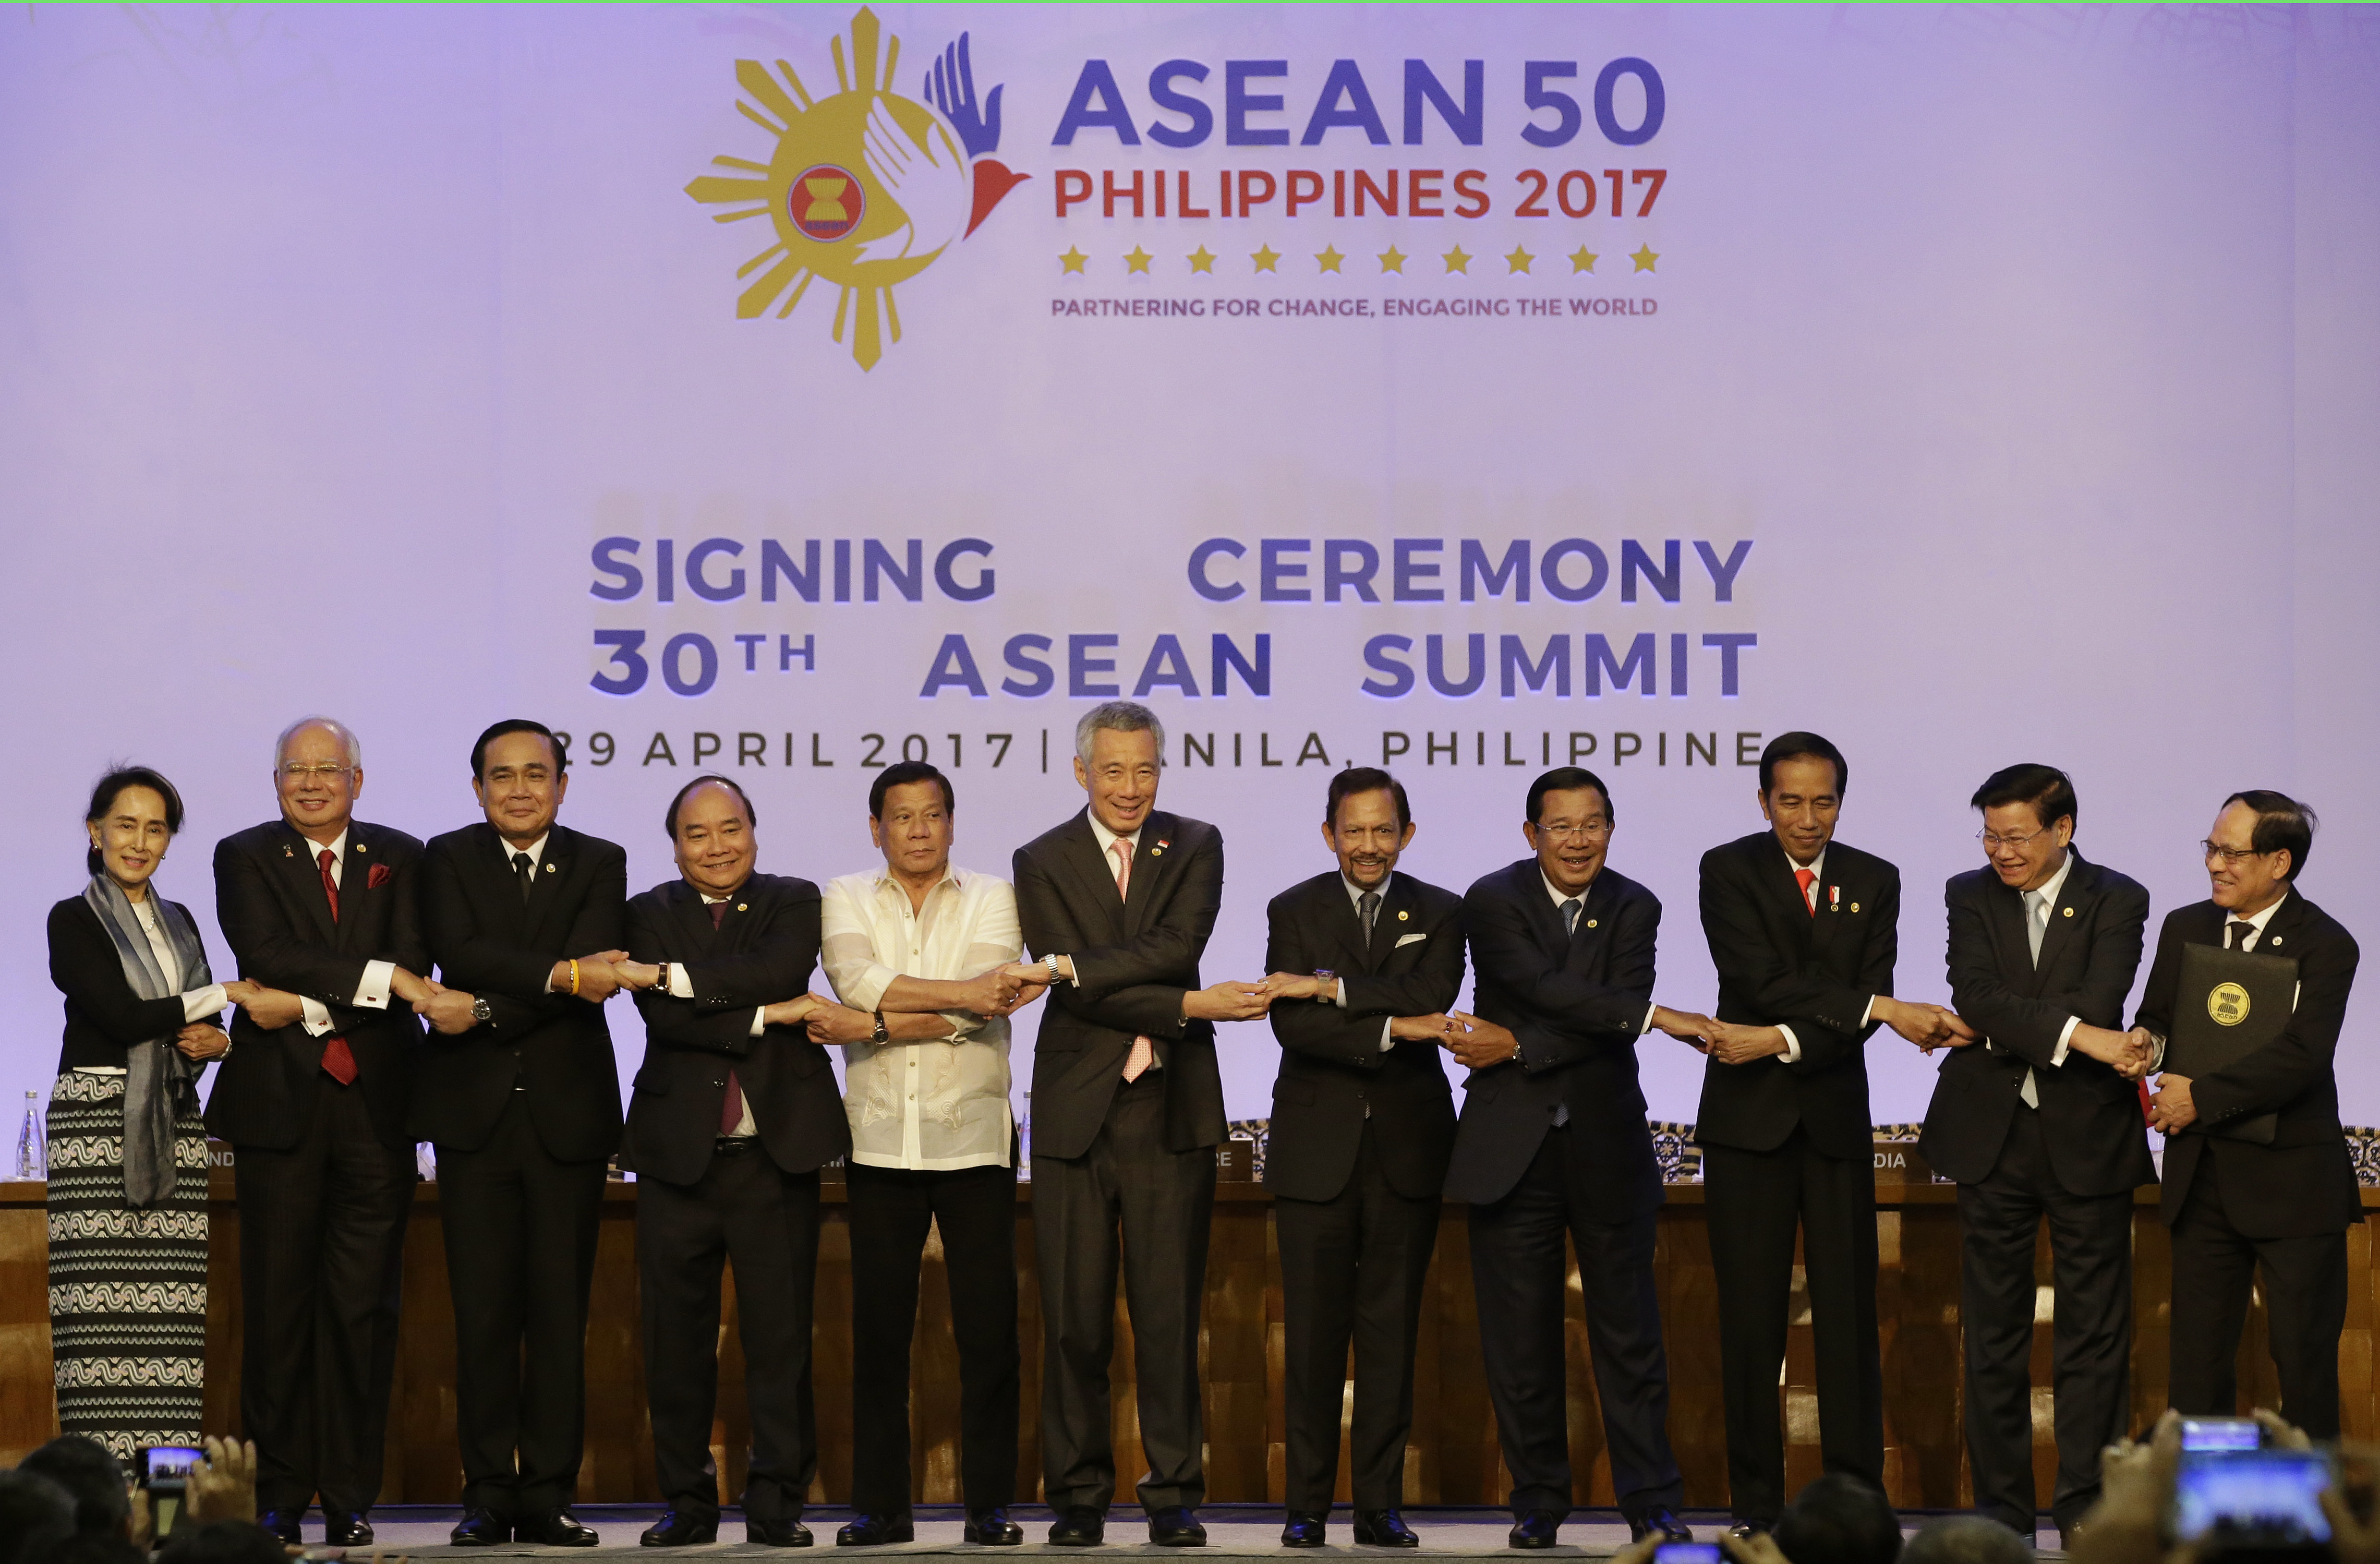 Association of Southeast Asian Nations (ASEAN) leaders from left, Myanmar Foreign Minister Aung San Suu Kyi, Malaysian Prime Minister Najib Razak,Thai Prime Minister Prayuth Chan-ocha, Vietnamese Prime Minister Nguyen Xuan Phuc, Philippine President Rodrigo Duterte, Singapore Prime Minister Lee Hsien Loong, Sultan Hassanal Bolkiah of Brunei Darussalam, Cambodian Prime Minister Hun Sen, Indonesian President Joko Widodo, Lao Prime Minister Thongloun Sisoulith and ASEAN Secretary General Le Luong Minh link arms as they pose after the signing ceremony of the 2017 ASEAN in metropolitan Manila, Philippines on Saturday, April 29, 2017. (AP Photo/Aaron Favila-POOL)